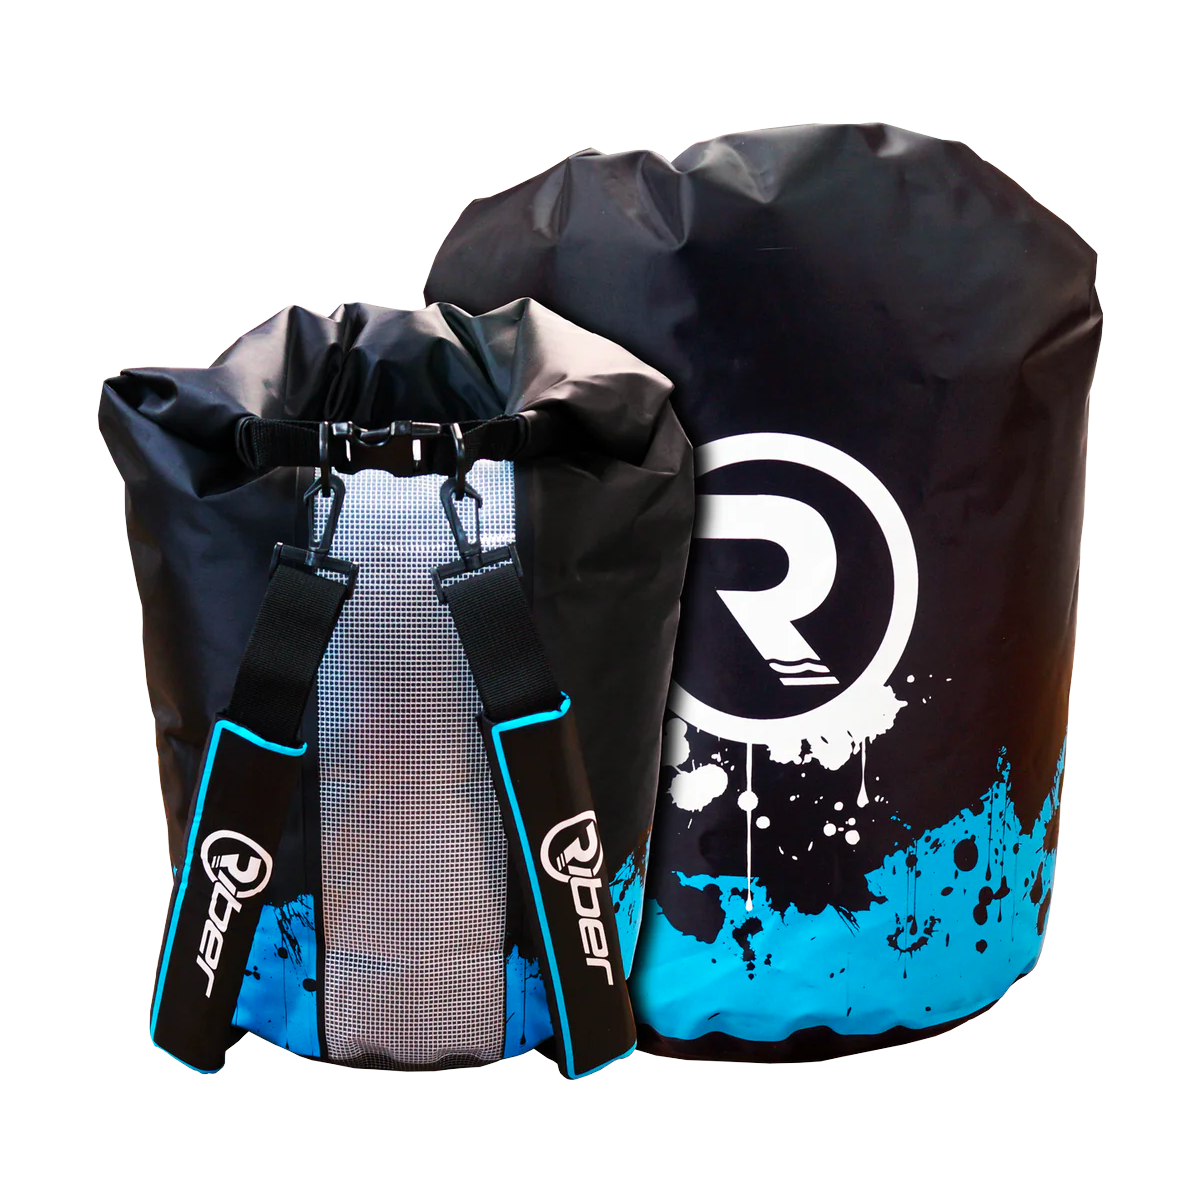 RIBER-Deluxe-Dry-Bag-Excel